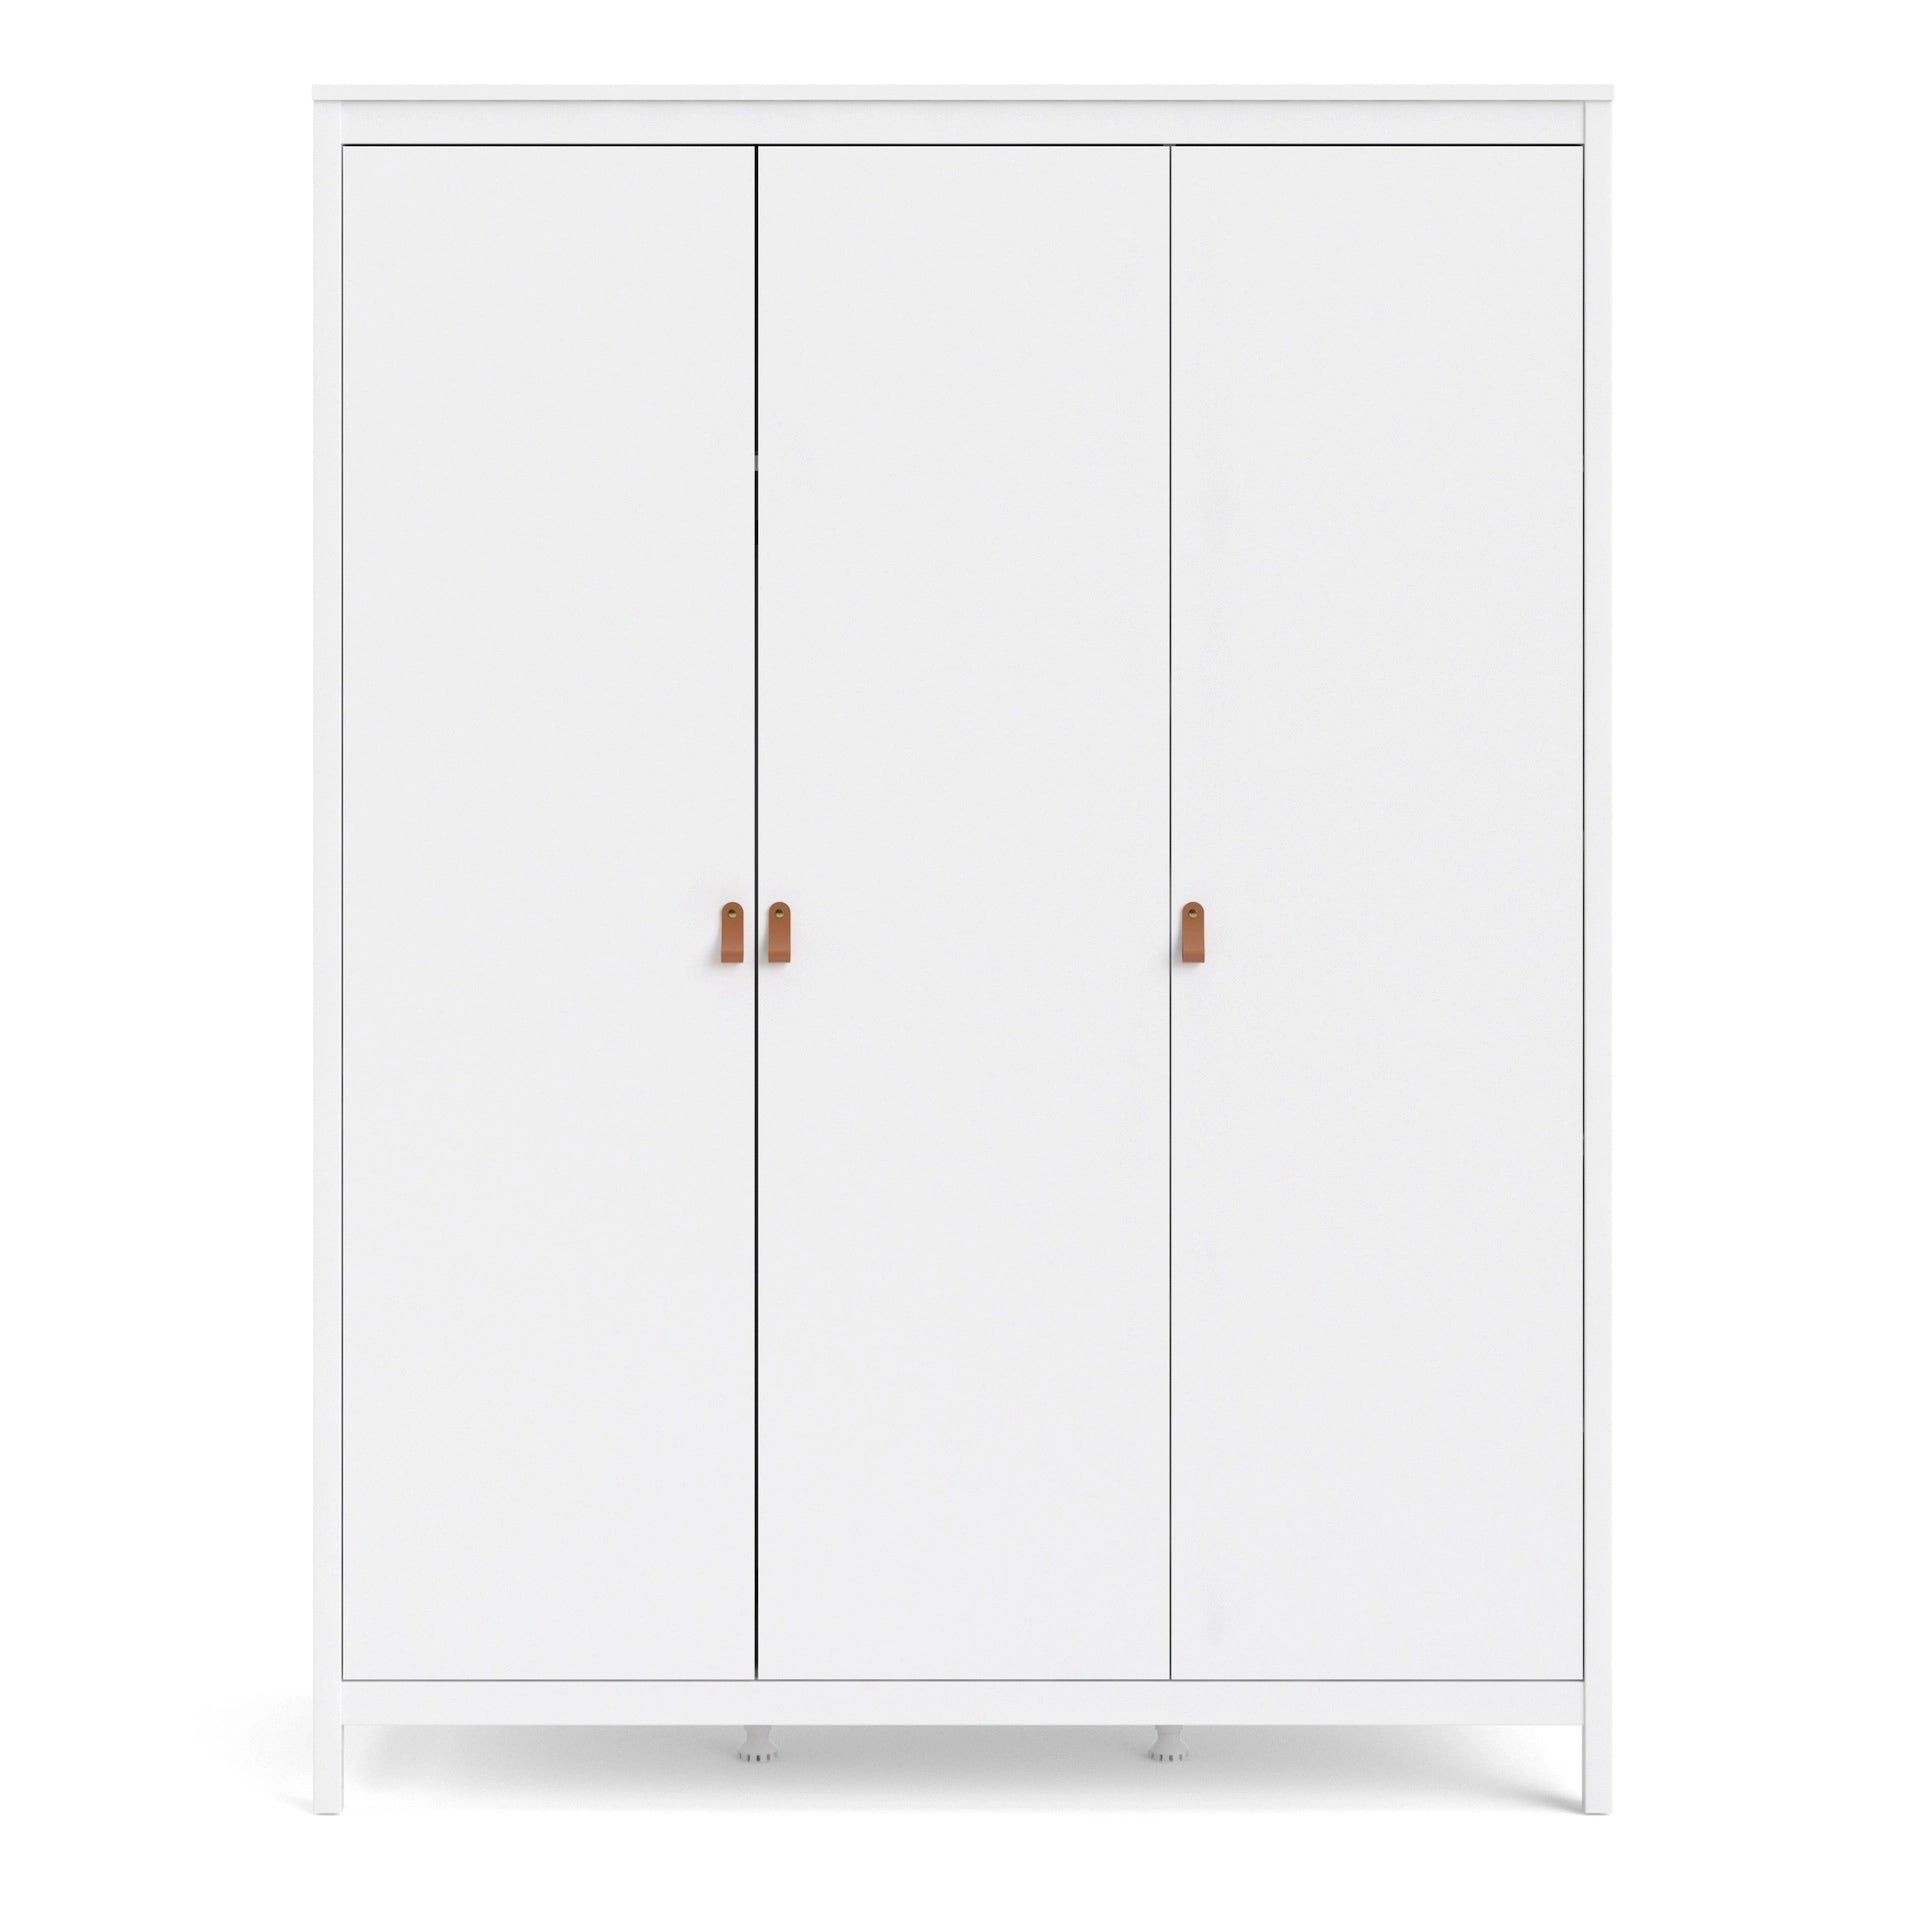 Furniture To Go Barcelona Wardrobe with 3 Doors in White